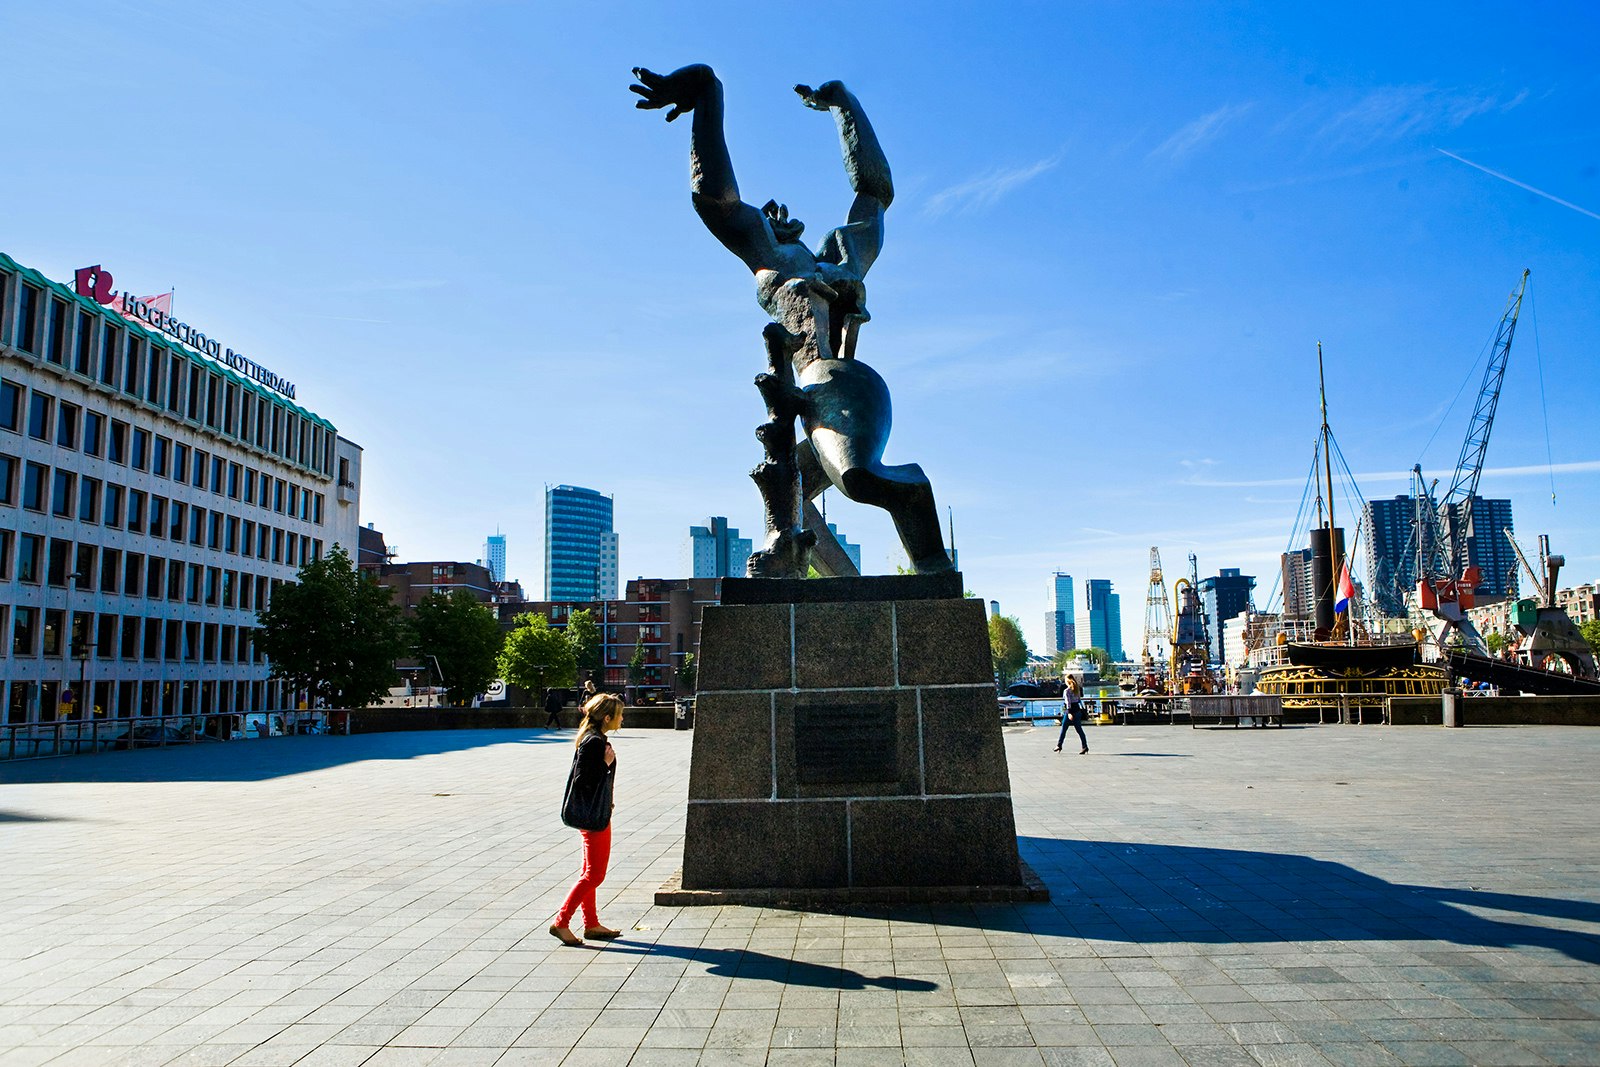 The Destroyed City (Ossip Zadkine, 1951-1953). Photo by Totenmetontwerpen / Rotterdam Partners.